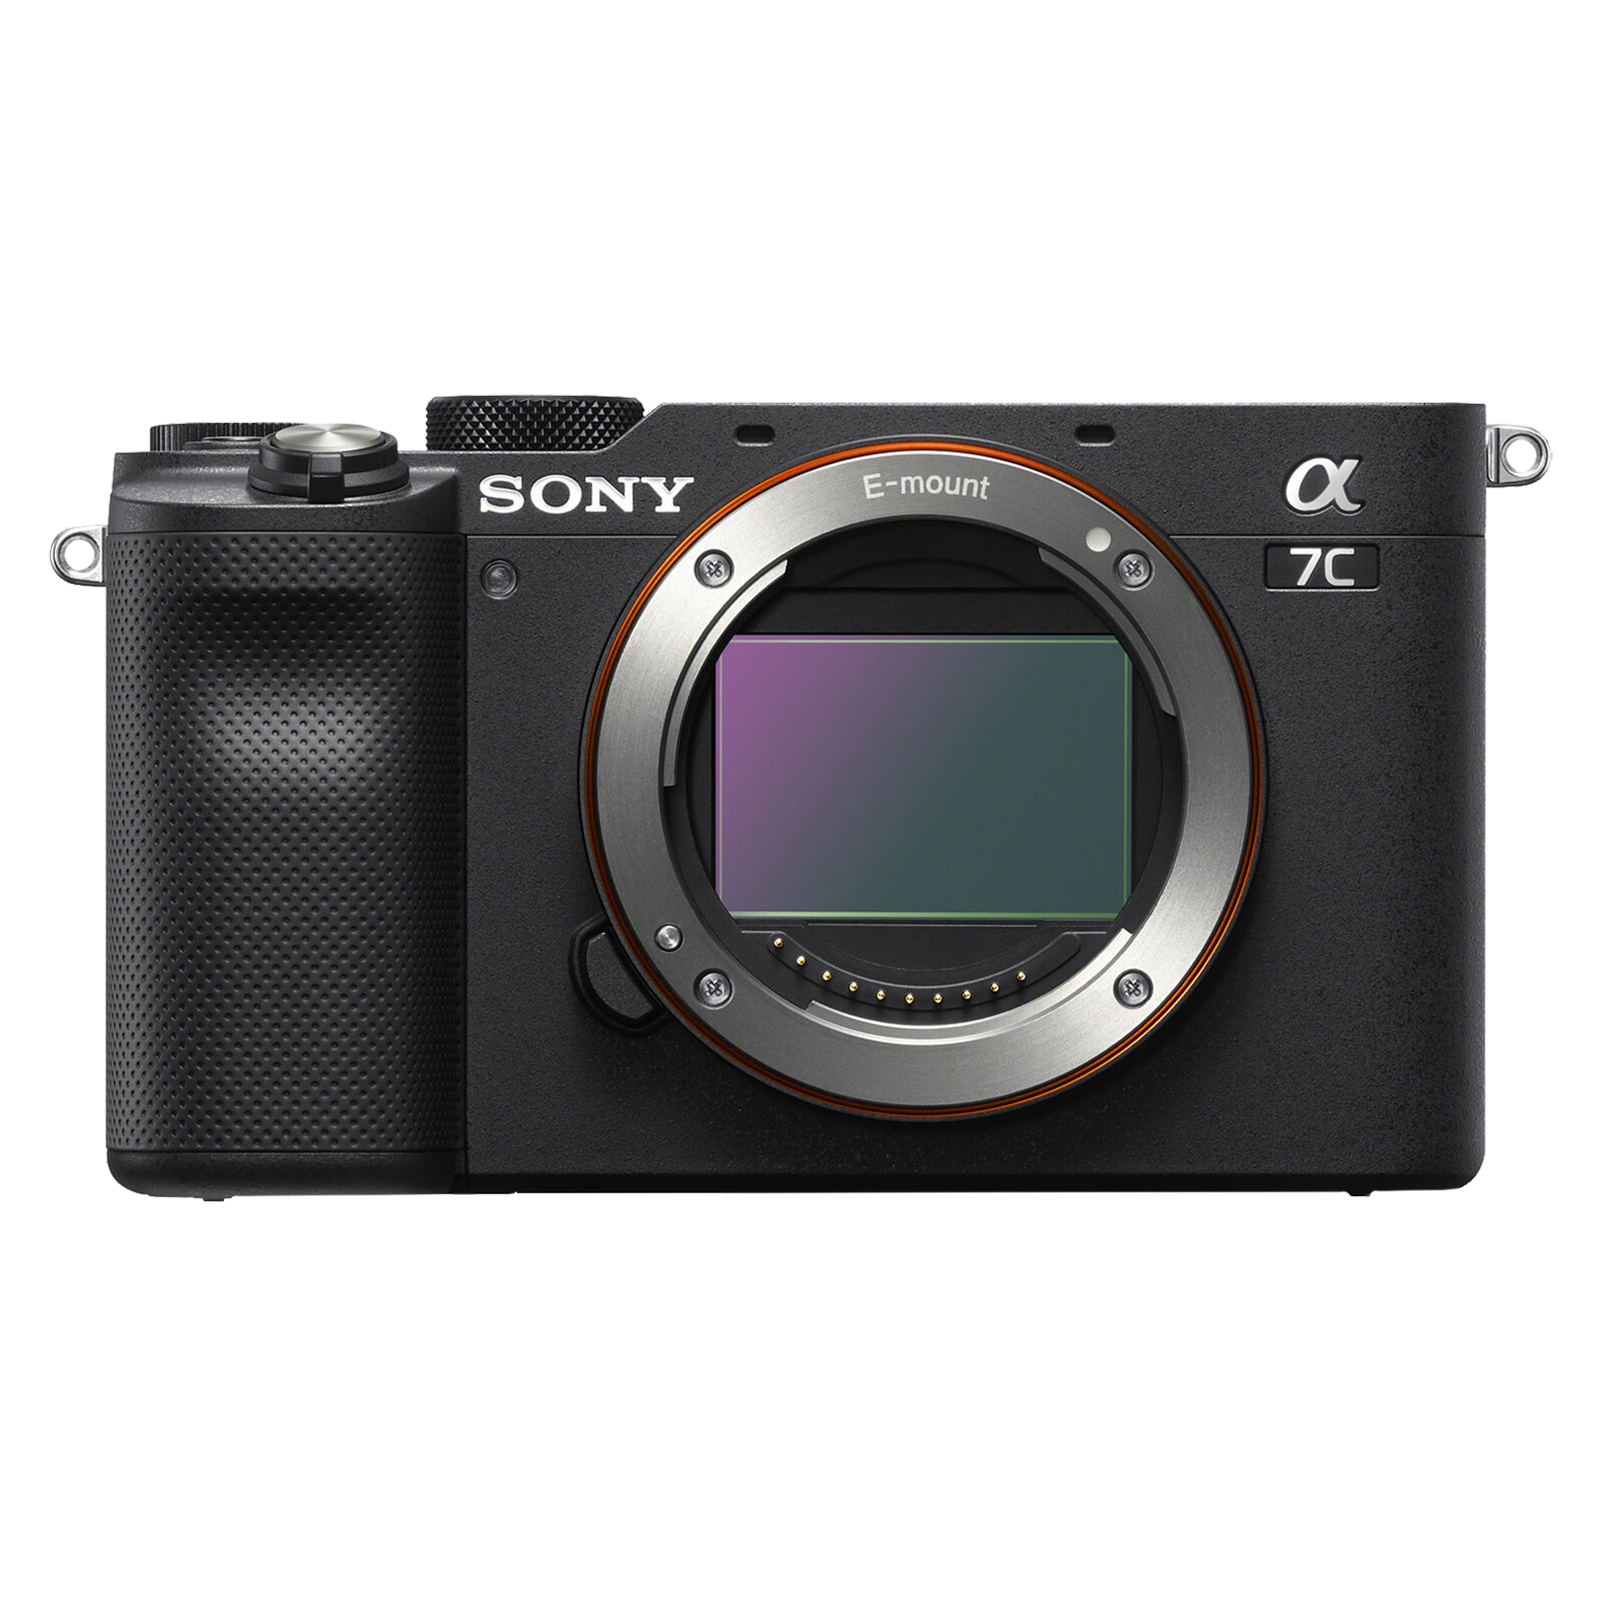 SONY Alpha 7C 24.2MP Mirrorless Camera (Body Only, 35.6 x 23.8 mm Sensor, Real Time Eye Auto Focus)